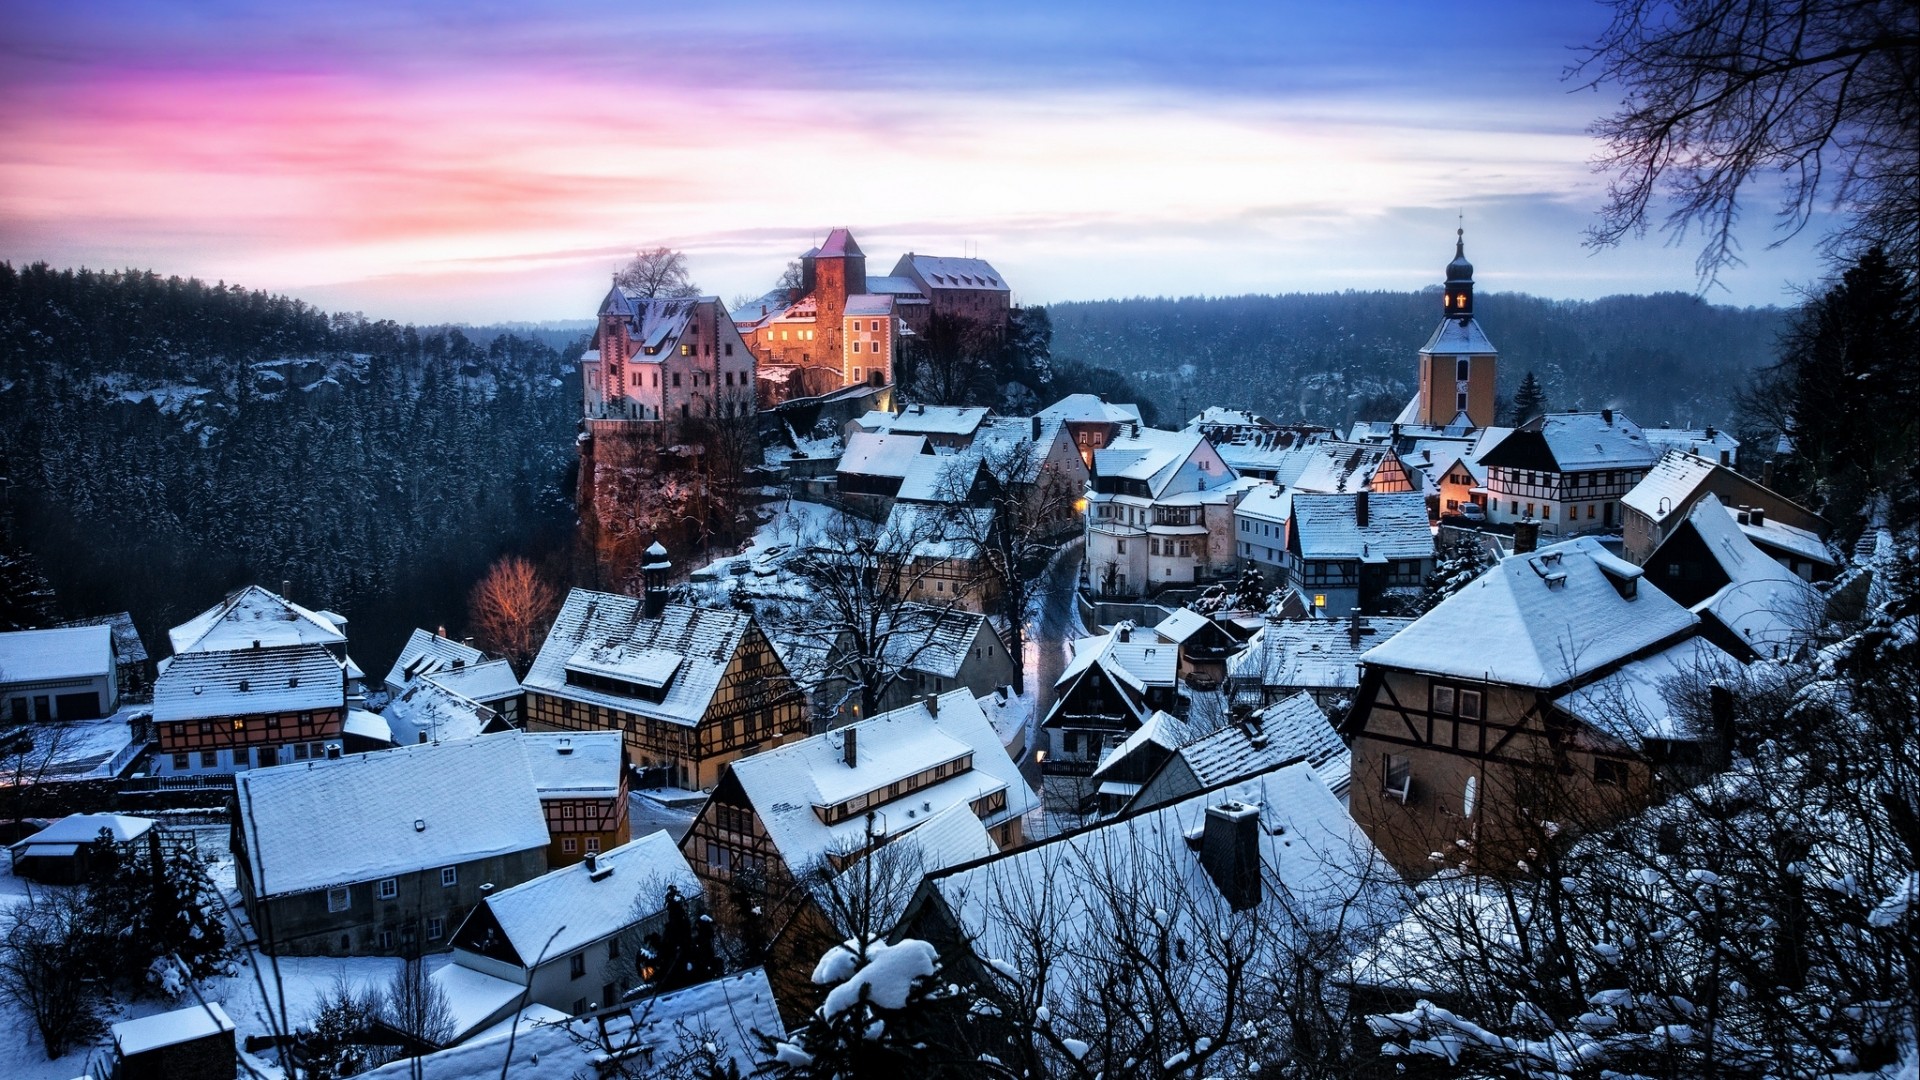 Ancient: Castle Cliff Town Winter Church Image for HD 16:9 High ...